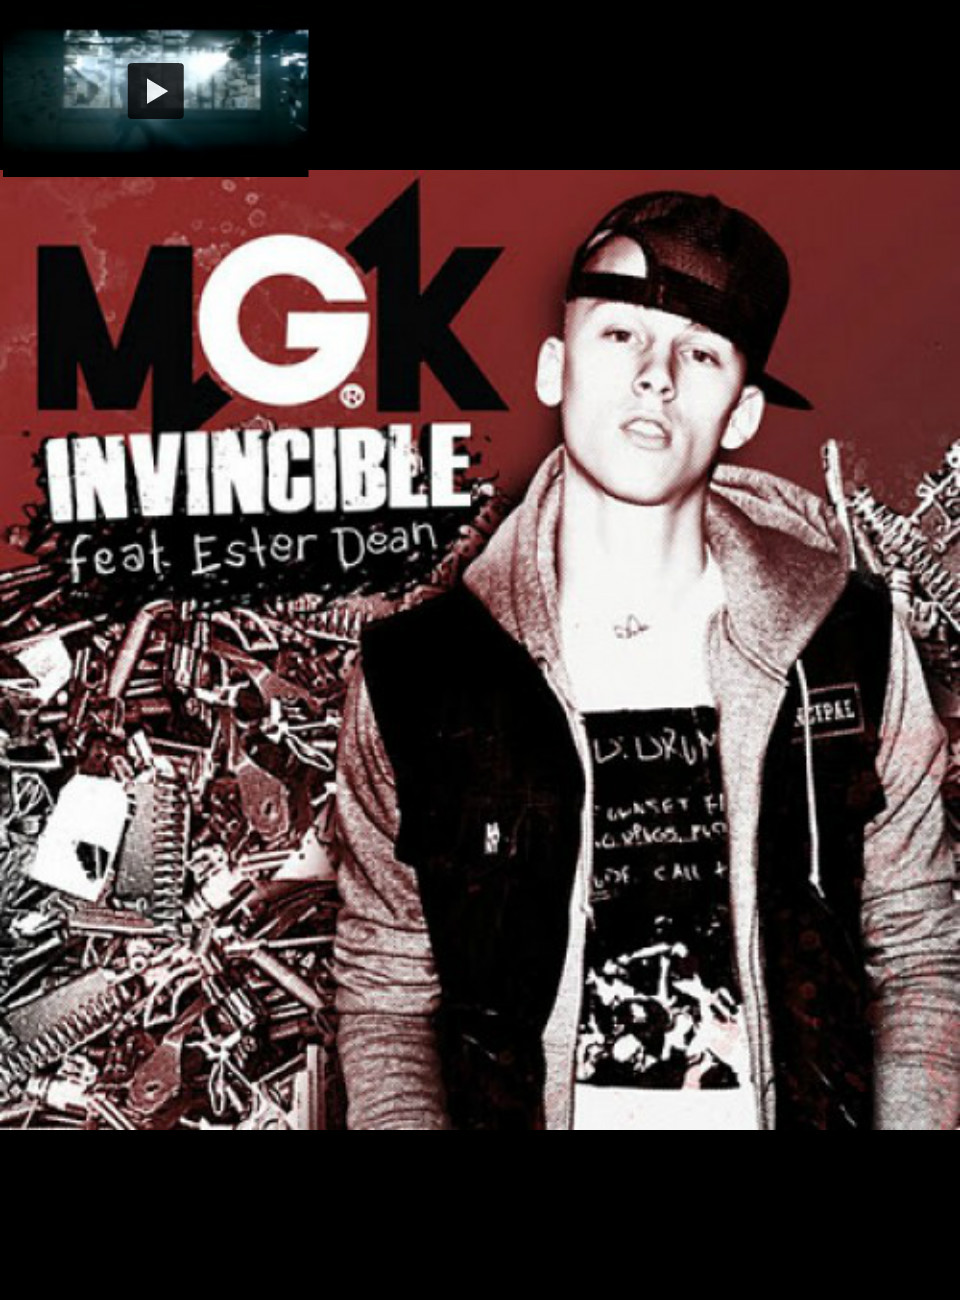 Mgk Invincible Quotes.